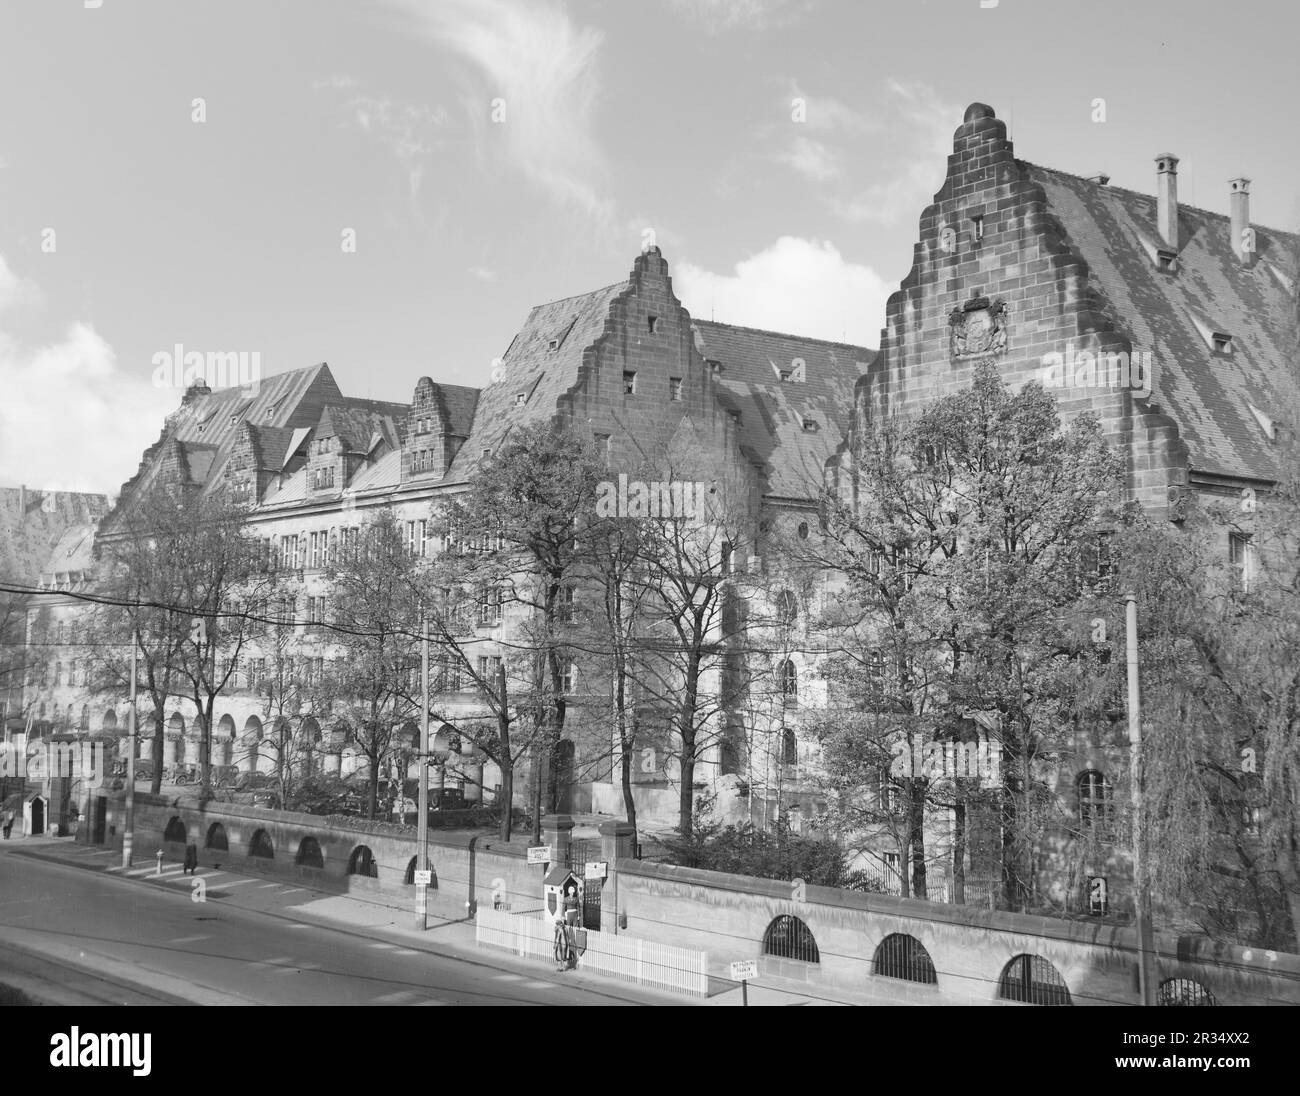 The famous Nuremberg courthouse where the trial of Nazi war criminals was held in 1945. Stock Photo